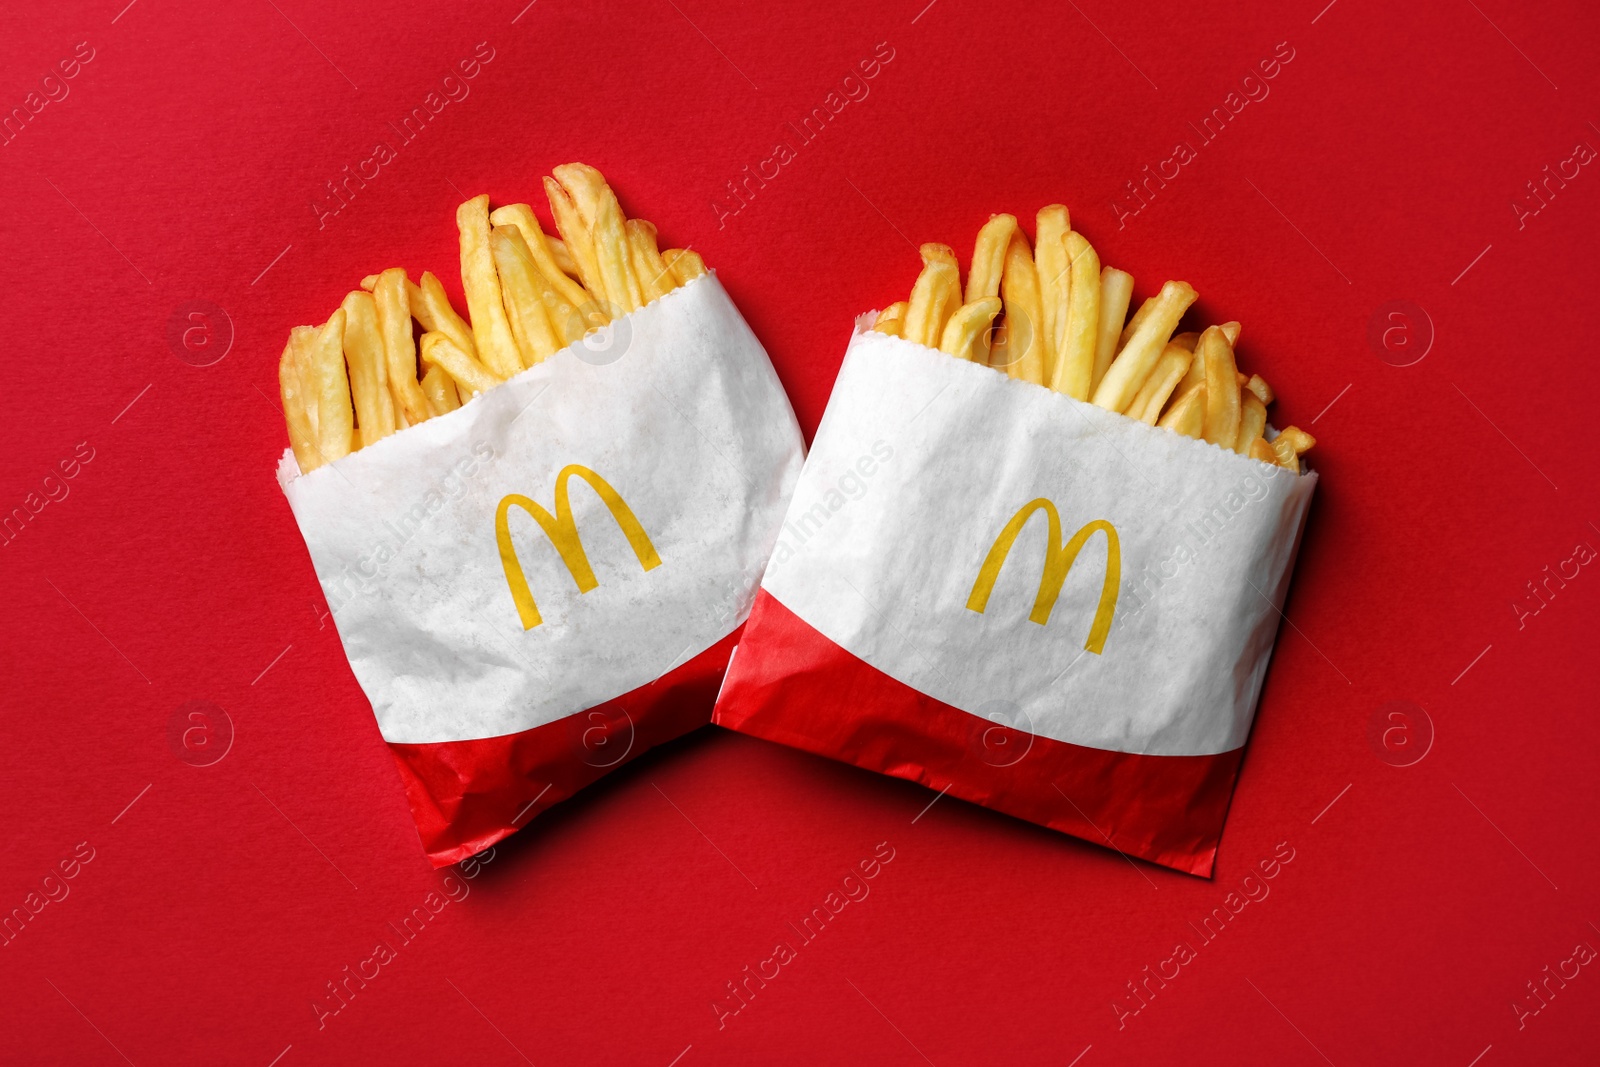 Photo of MYKOLAIV, UKRAINE - AUGUST 12, 2021: Two small portions of McDonald's French fries on red background, flat lay